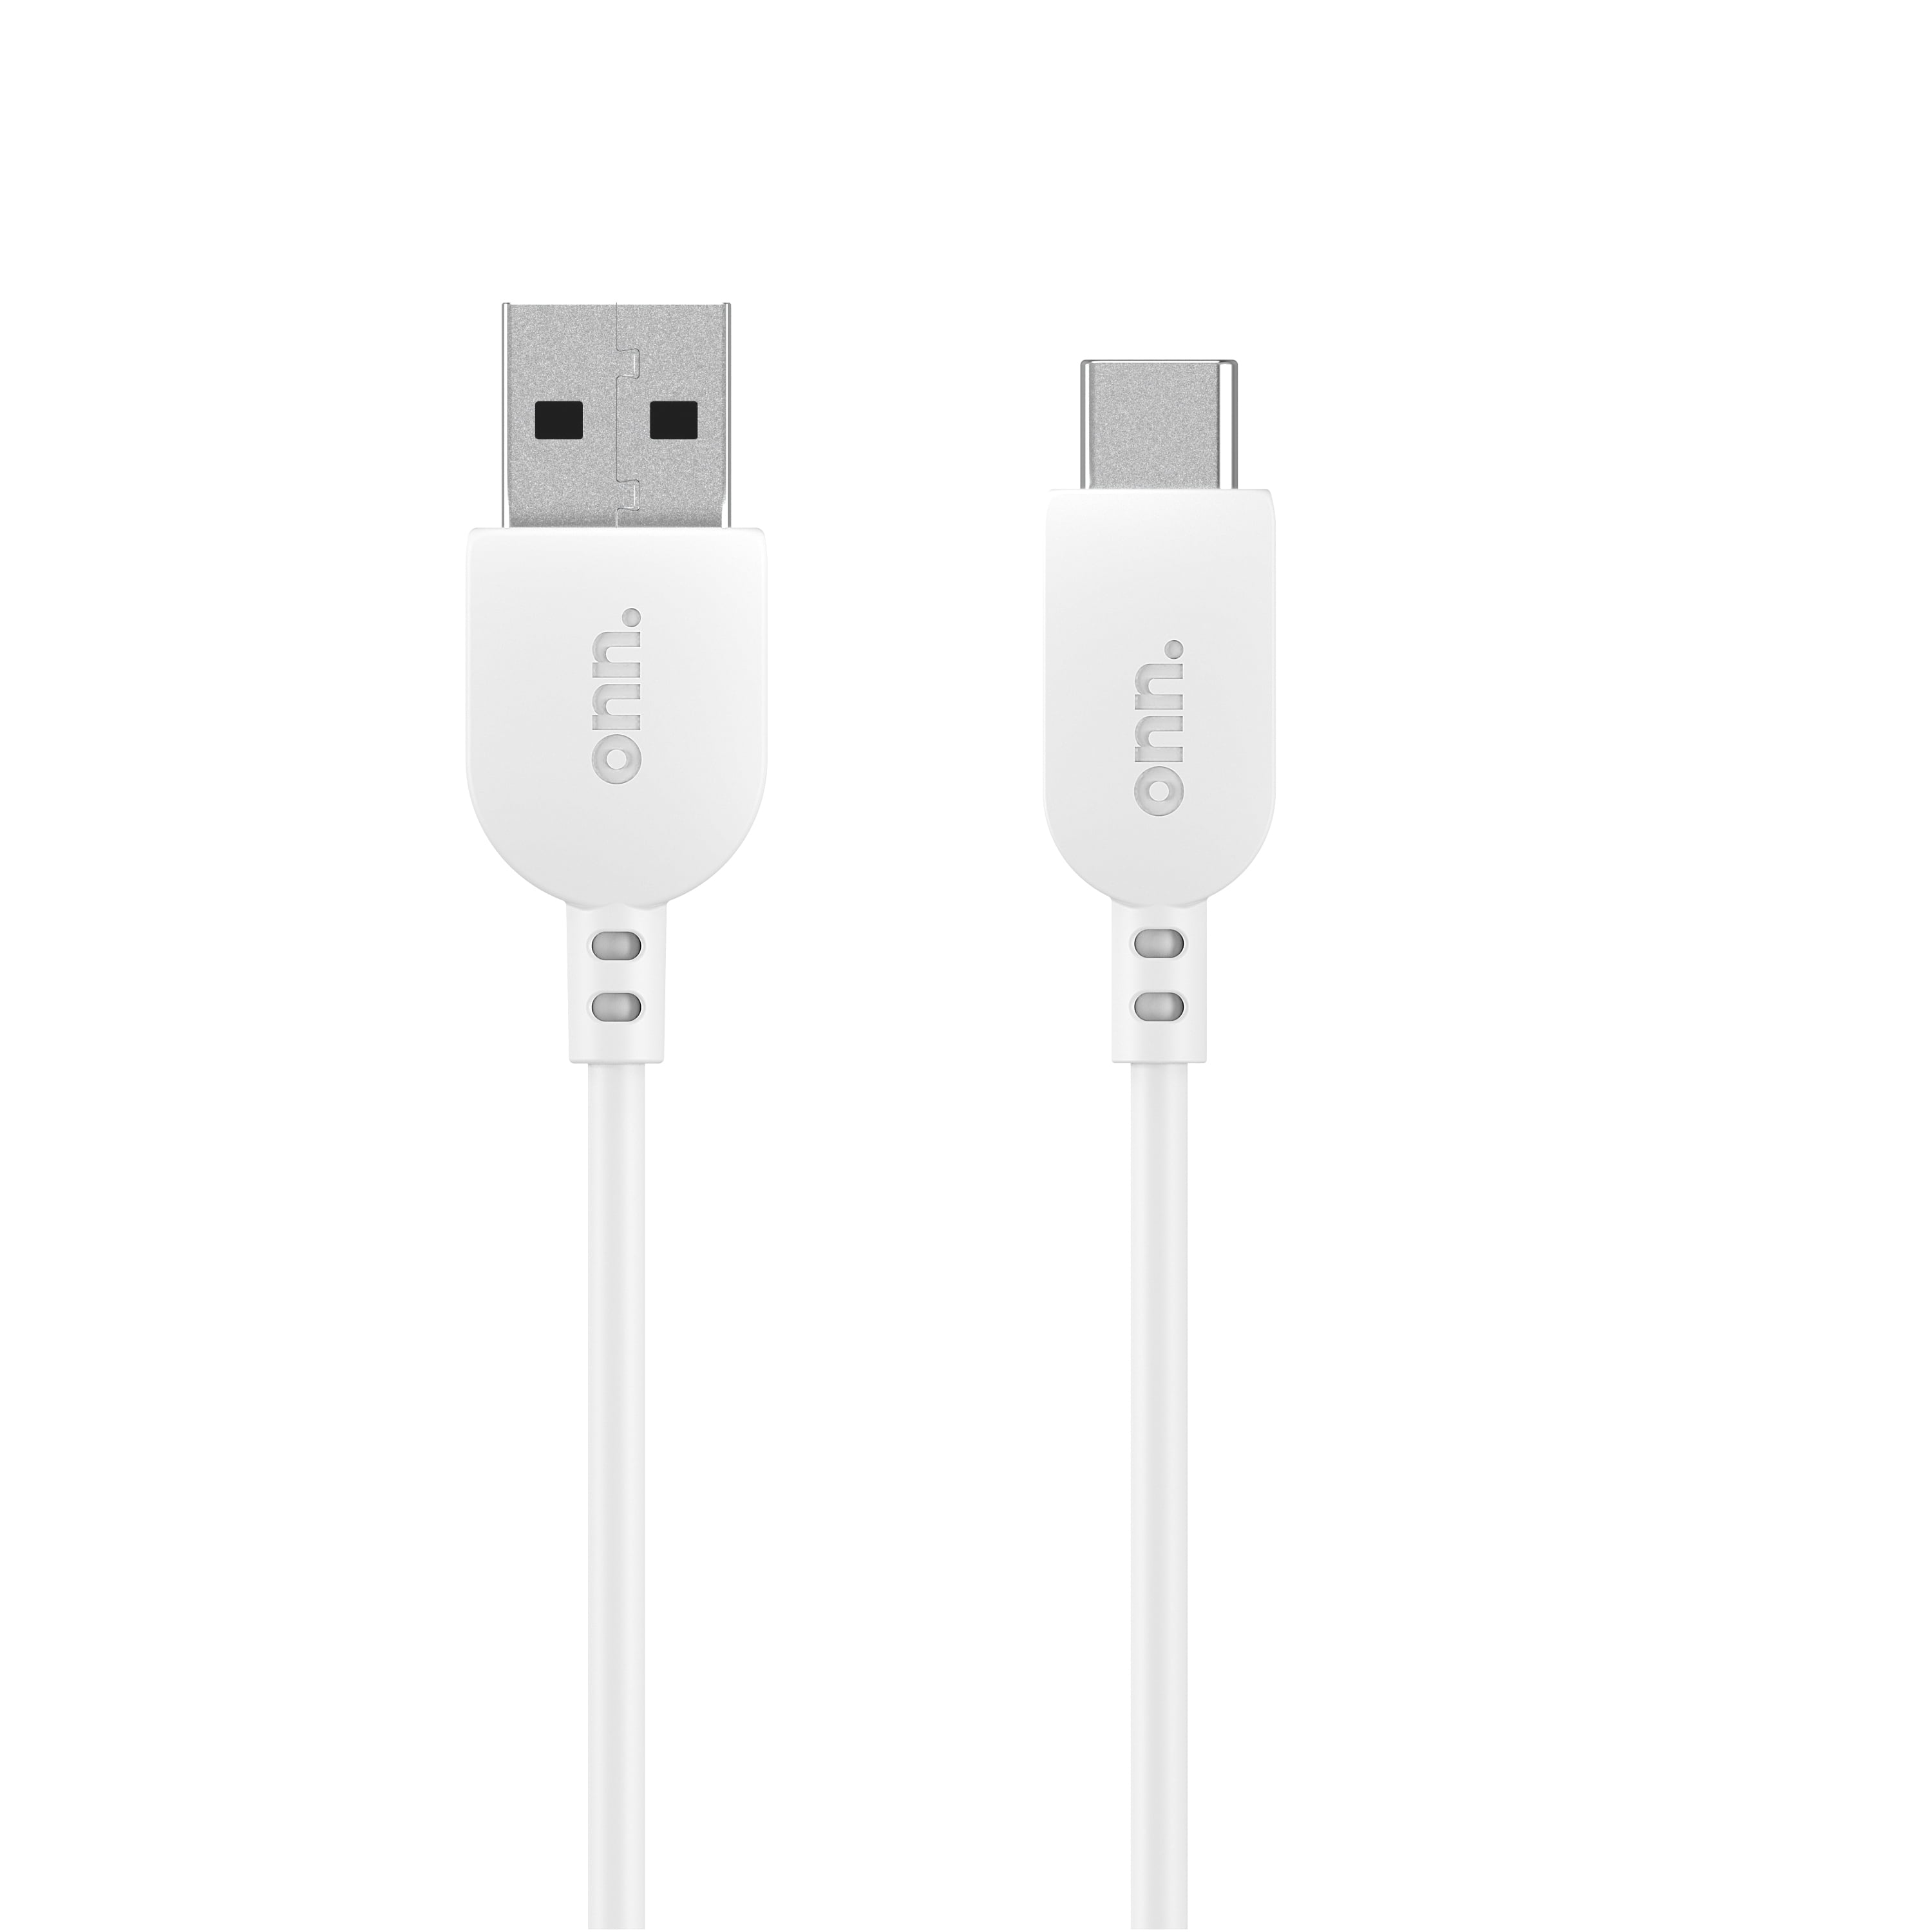 Onn. White USB-C to USB Cable - 3 ft